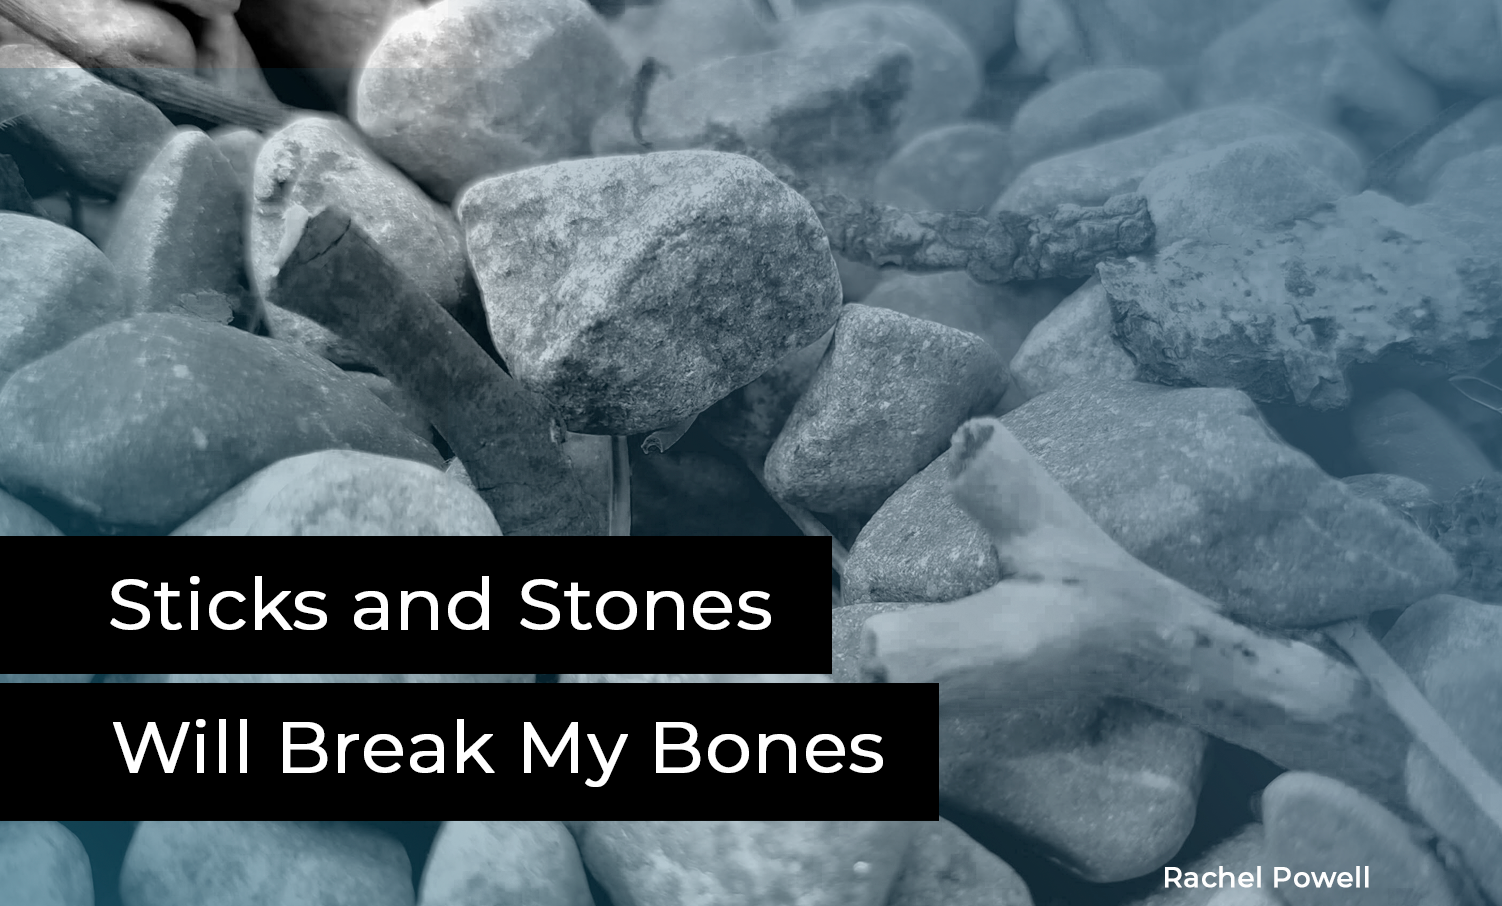 Sticks and stones with the text Stick and Stones will break my bones overlayed on top.